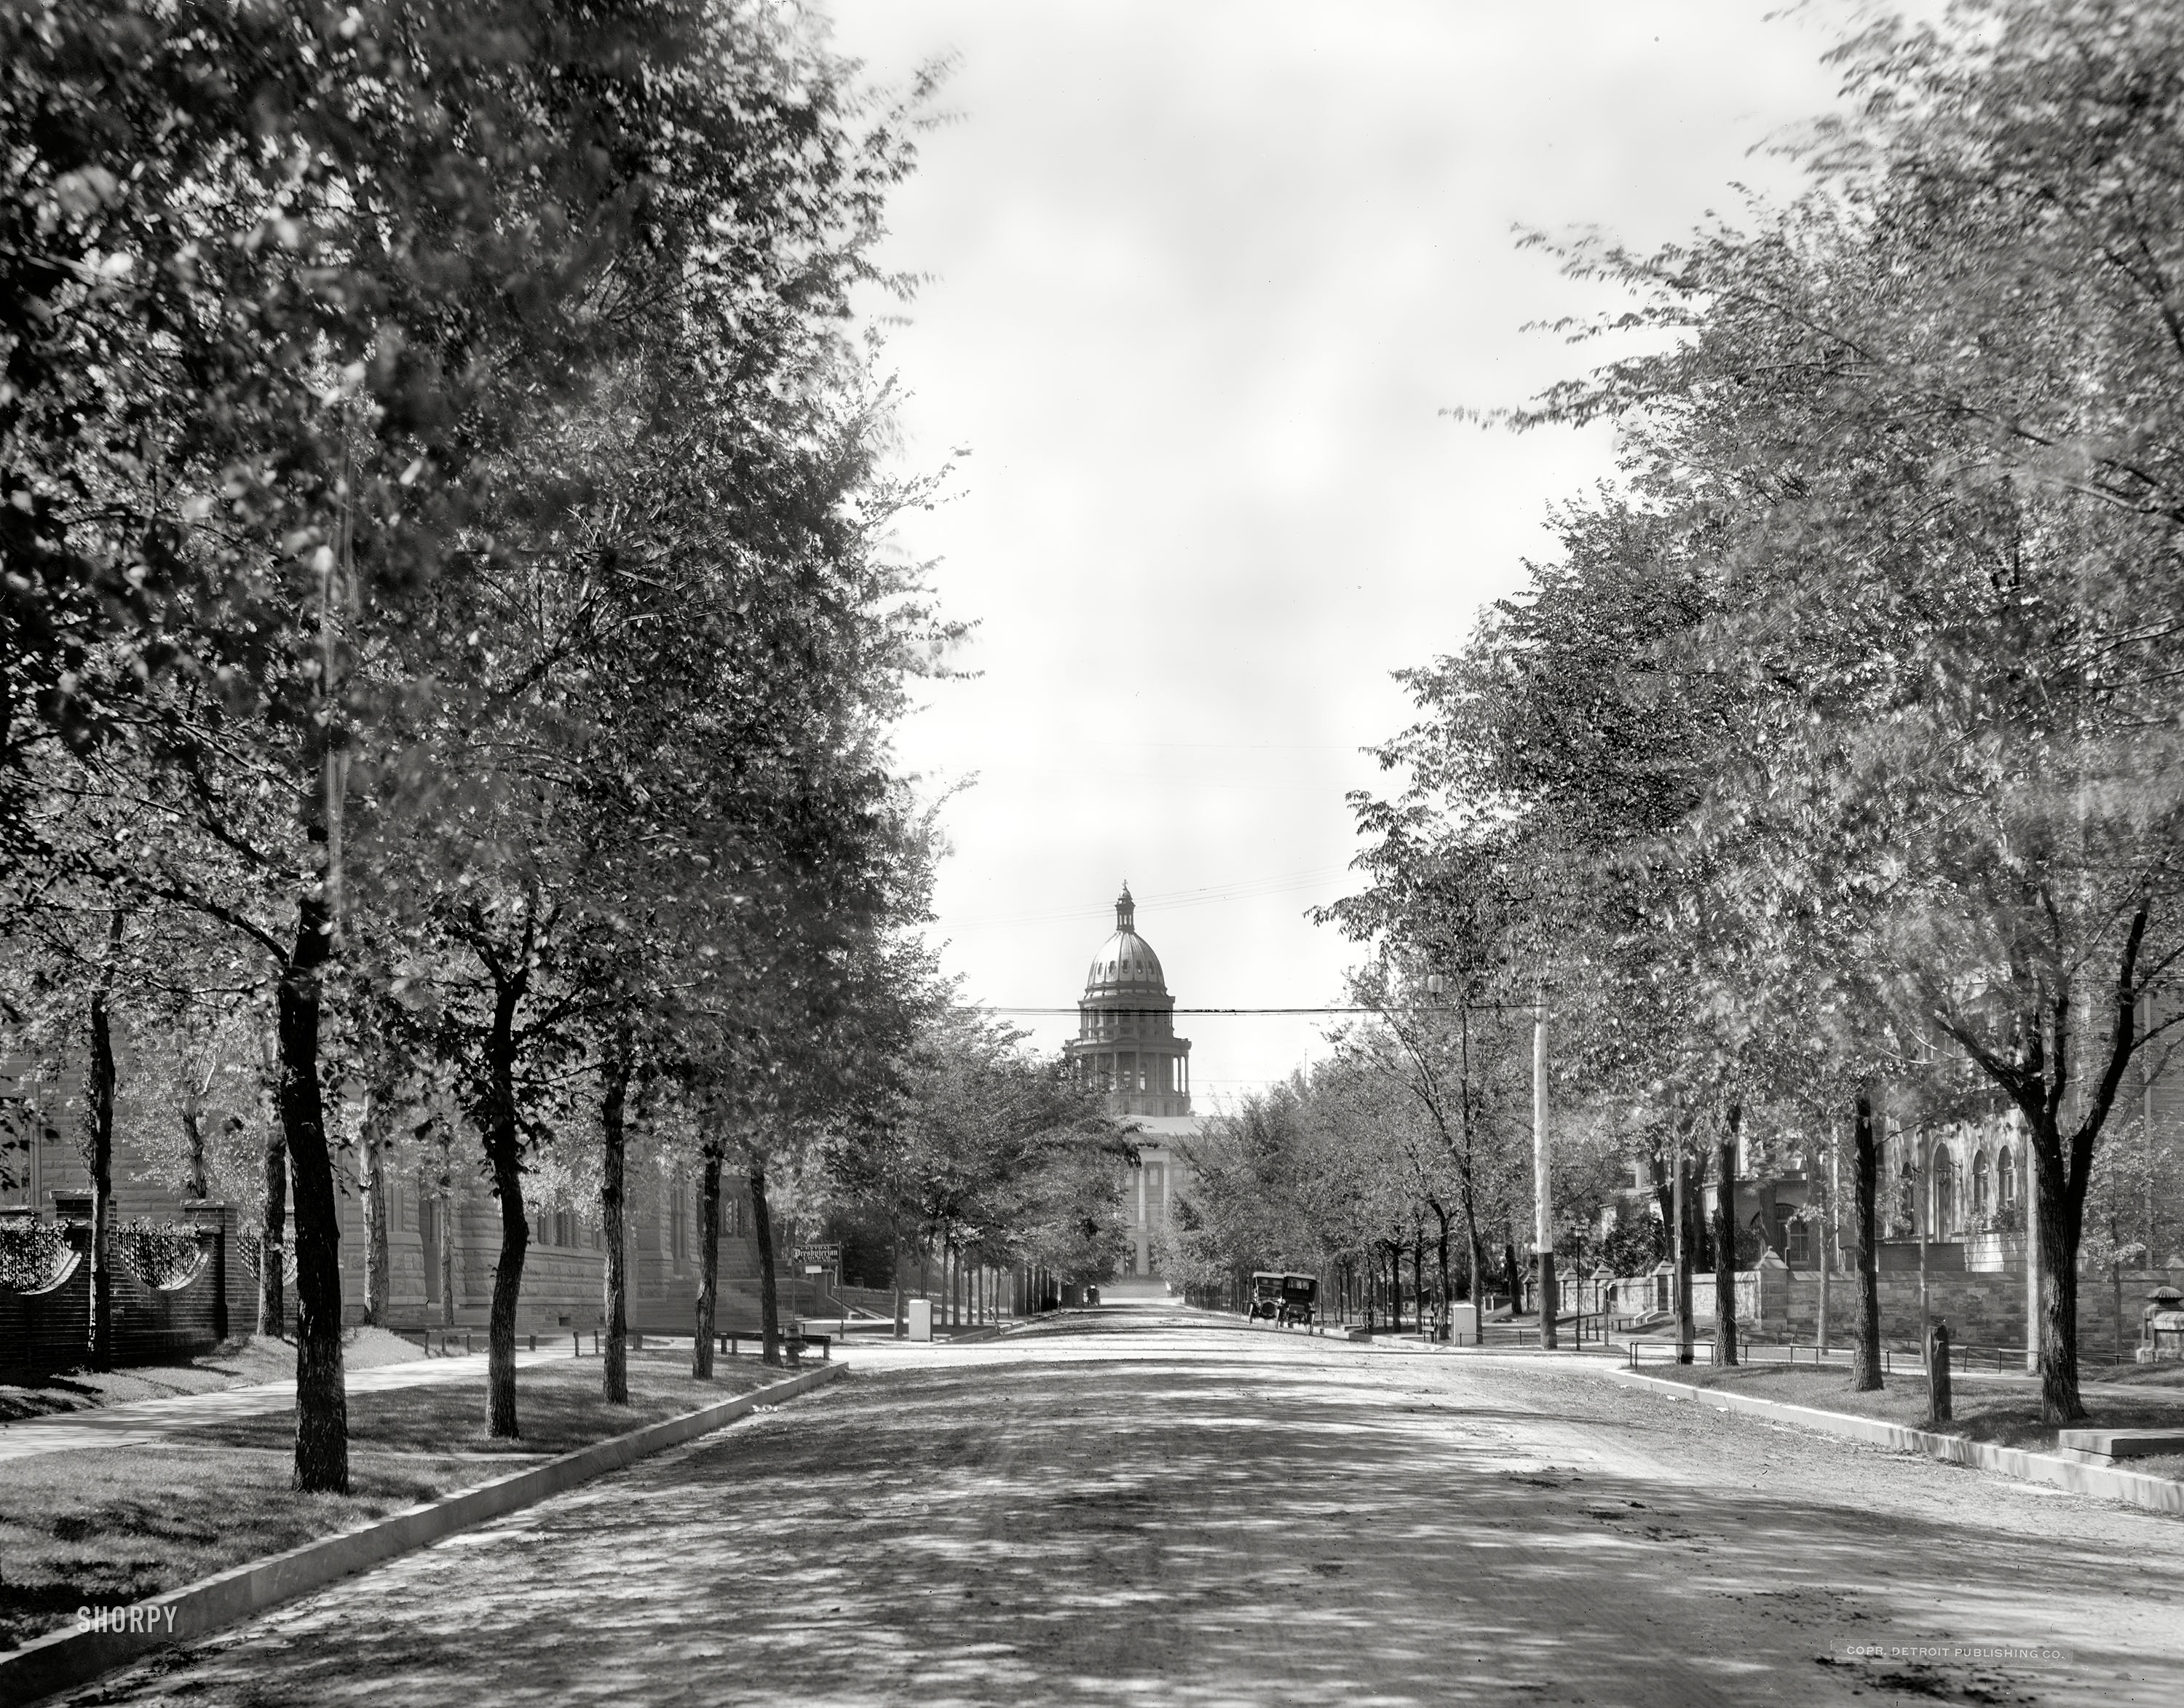 Denver circa 1908. "Sherman Avenue and Colorado statehouse." 8x10 glass negative by William Henry Jackson, Detroit Publishing Co. View full size.